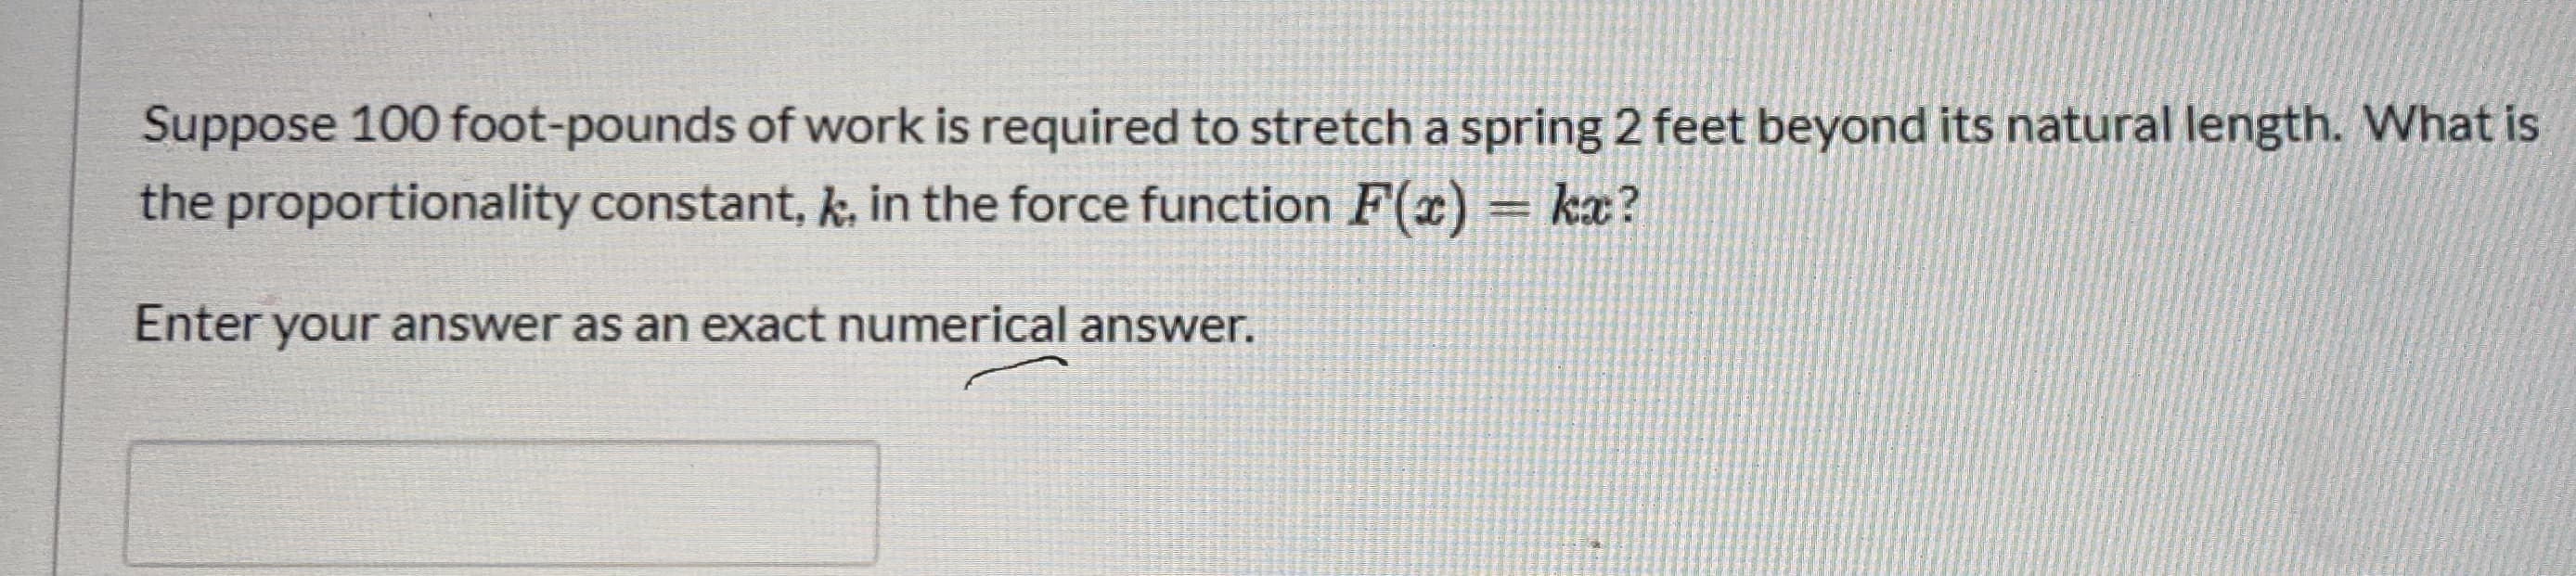 Suppose 100 foot-pounds of work is required to stretch a spring 2 feet beyond its natural length. What is
the proportionality constant, k, in the force function F(x) = kæ?
Enter your answer as an exact numerical answer.
